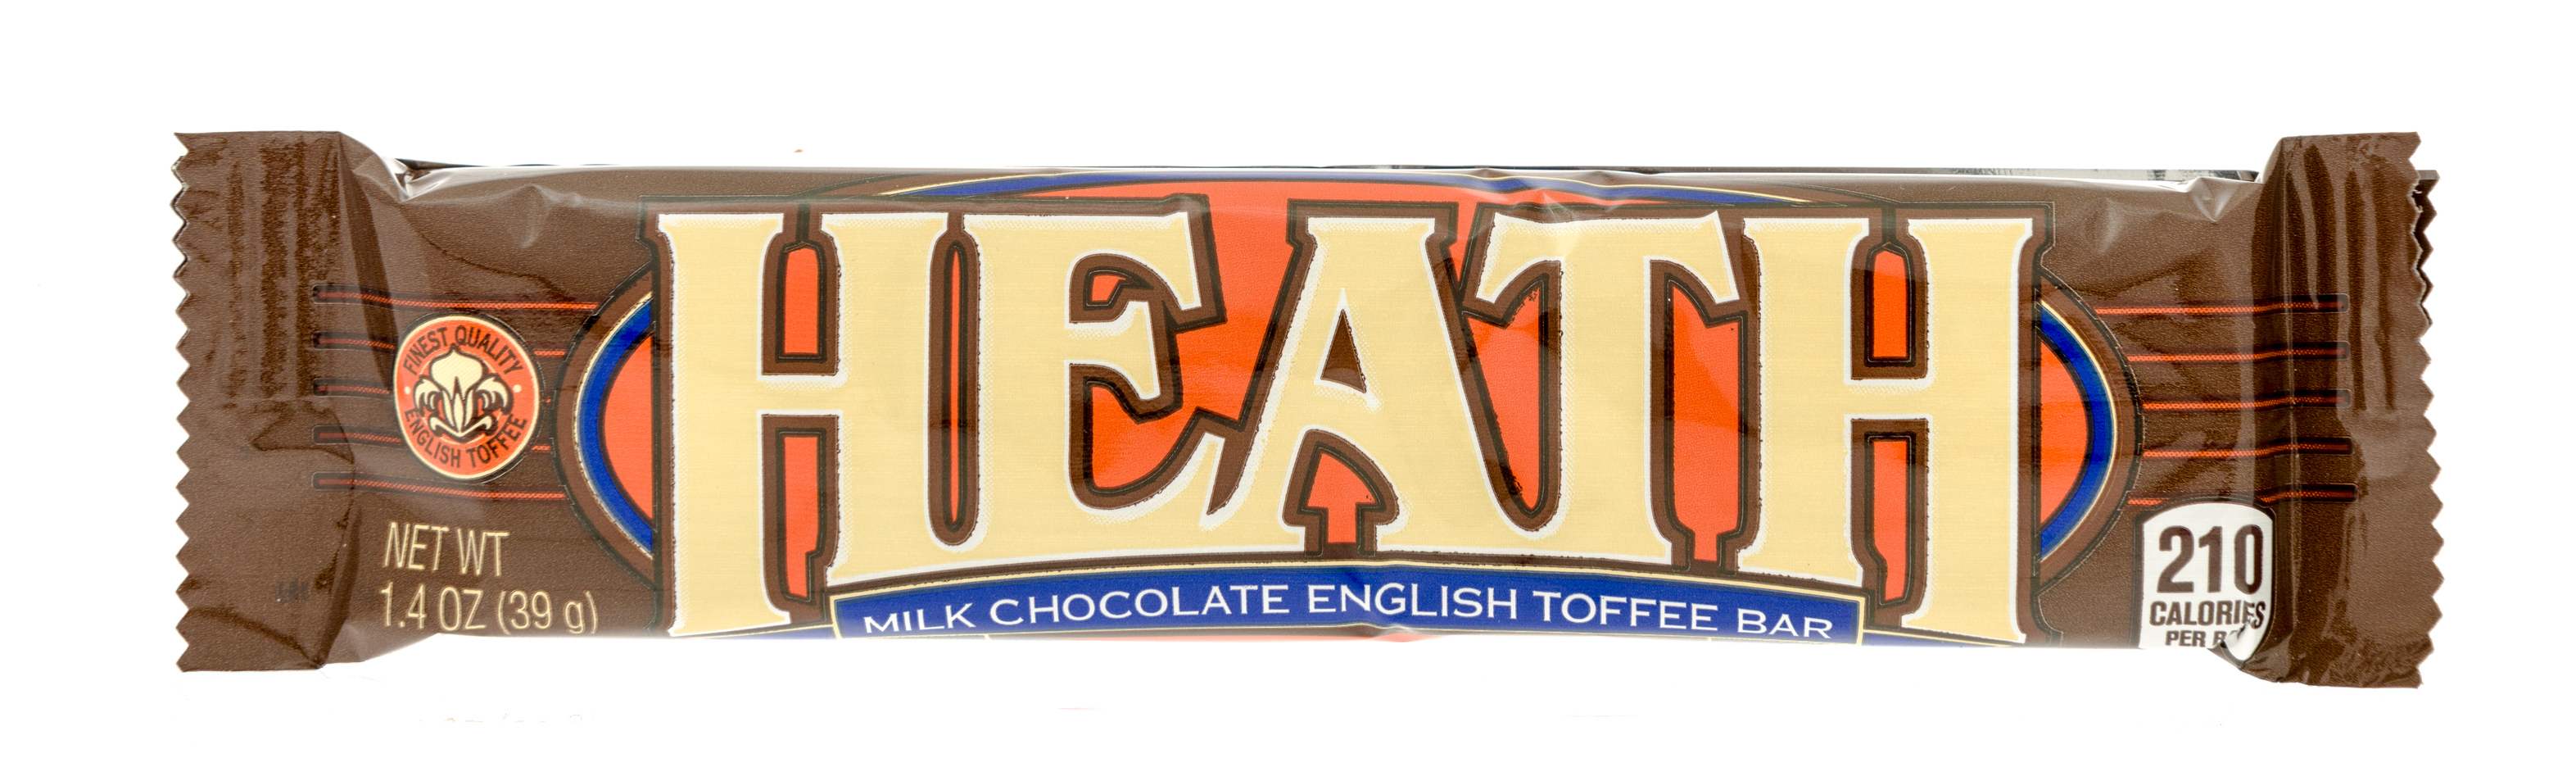 HEATH Milk Chocolate English Toffee Bar wrapper with logo and calorie information